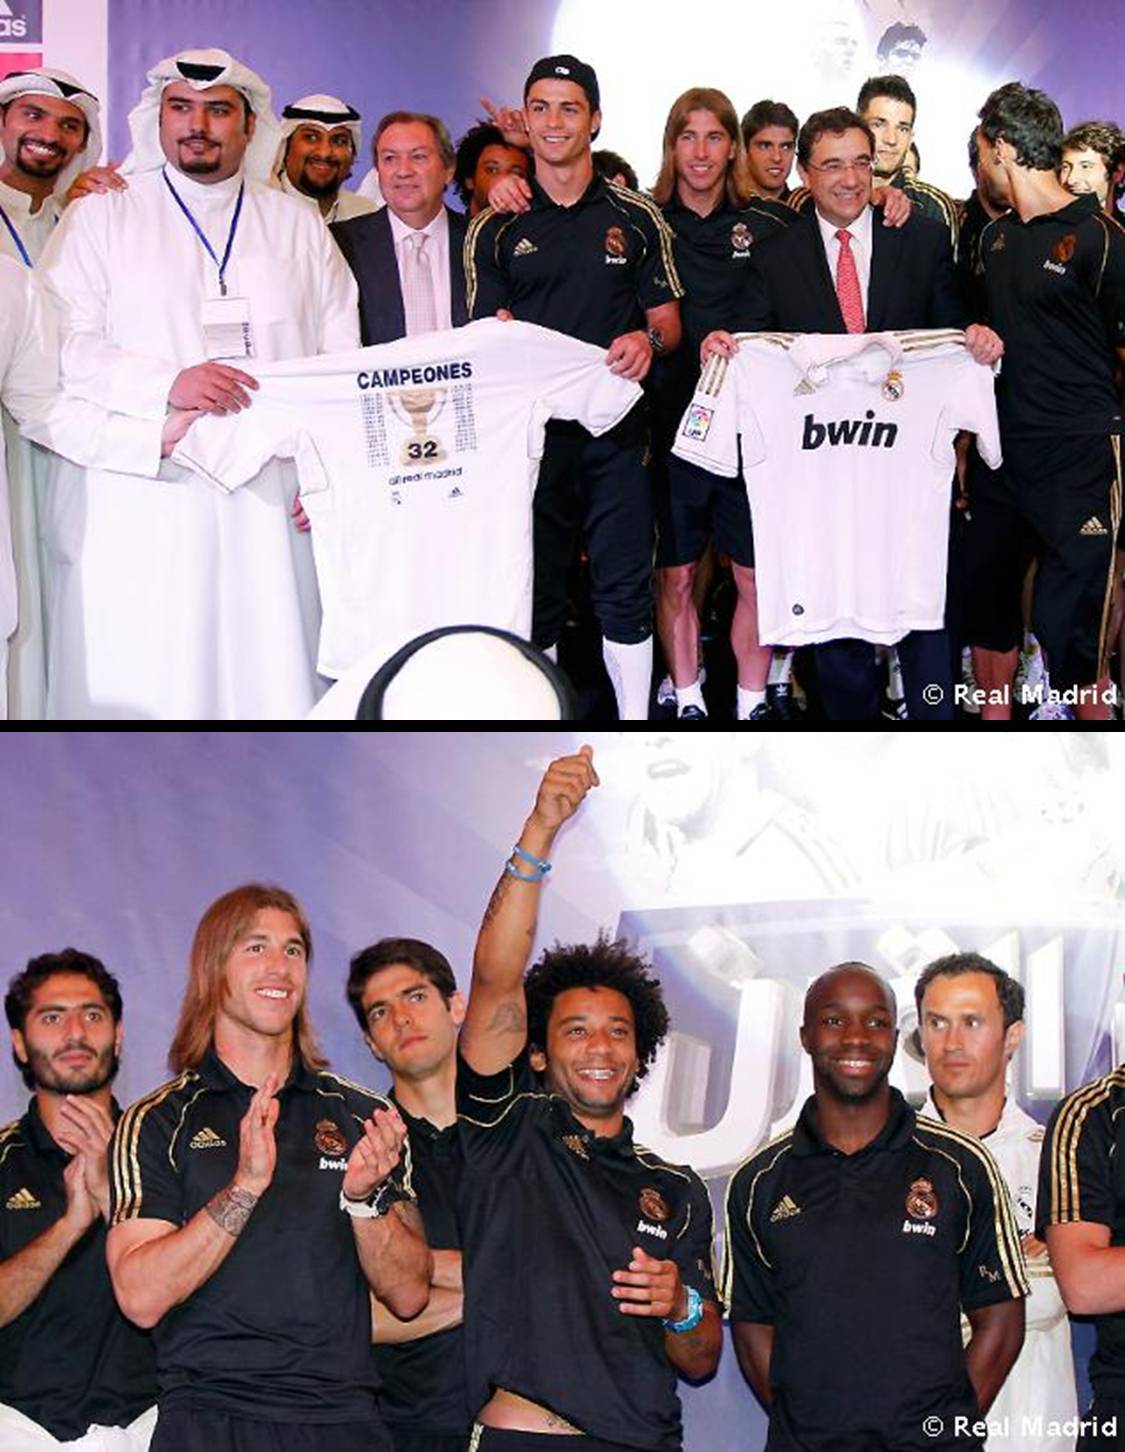 Before dinner a welcome ceremony for the champions, Kuwait 15.05.2012.
The boys must already have been starving after the long journey. One or two speeches, then finally something to eat!Marcelo sunshiny as always. The gentleman on the left in the upper photo could be his brother, all smiles  :o)
My other tumblr: Eclectic Interests and Beautiful Sports